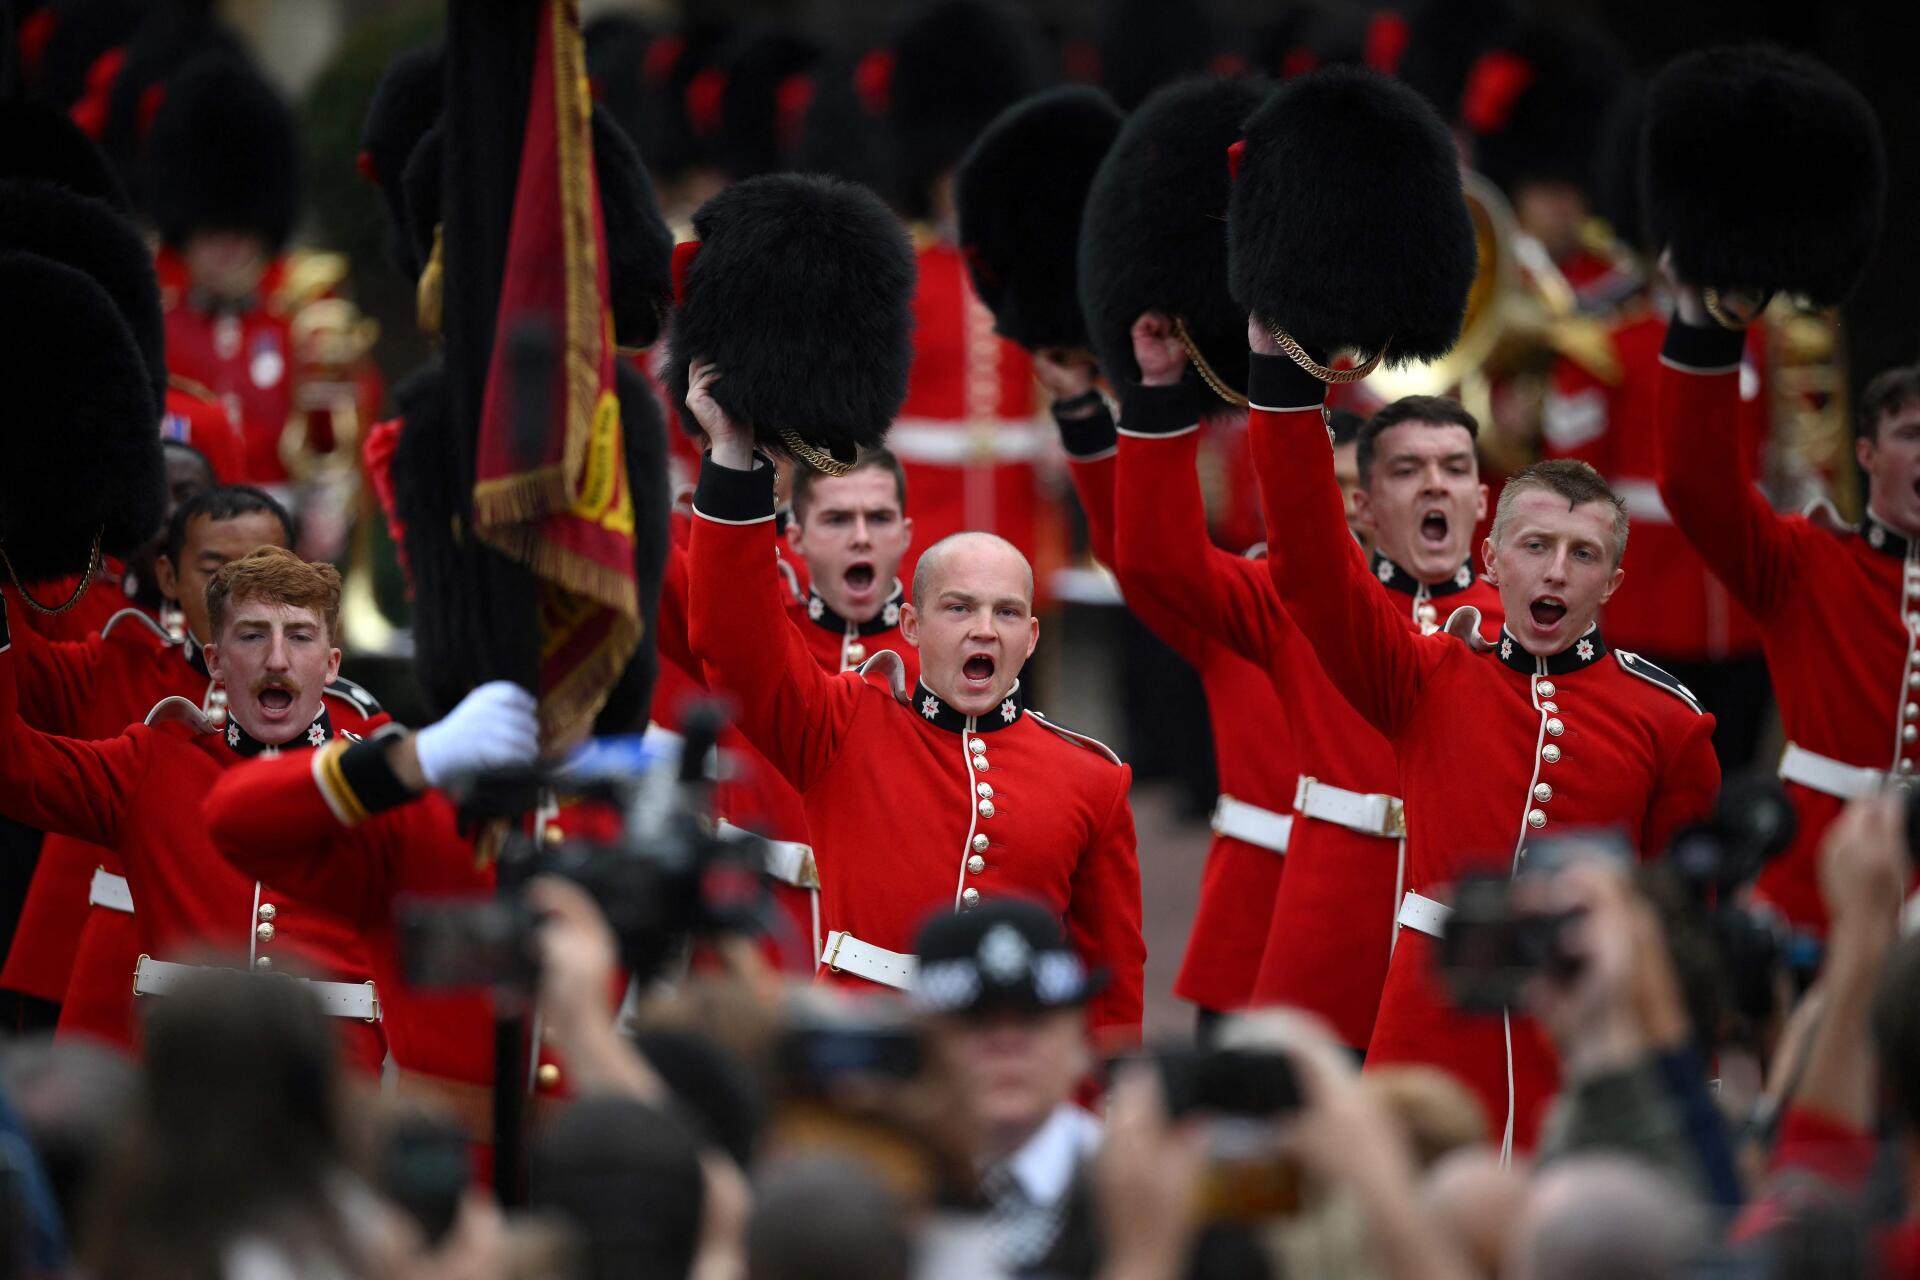 Members of the Coldstream Guards raise their hats to greet the new king in Friary Court at St James's Palace in London on September 10, 2022.